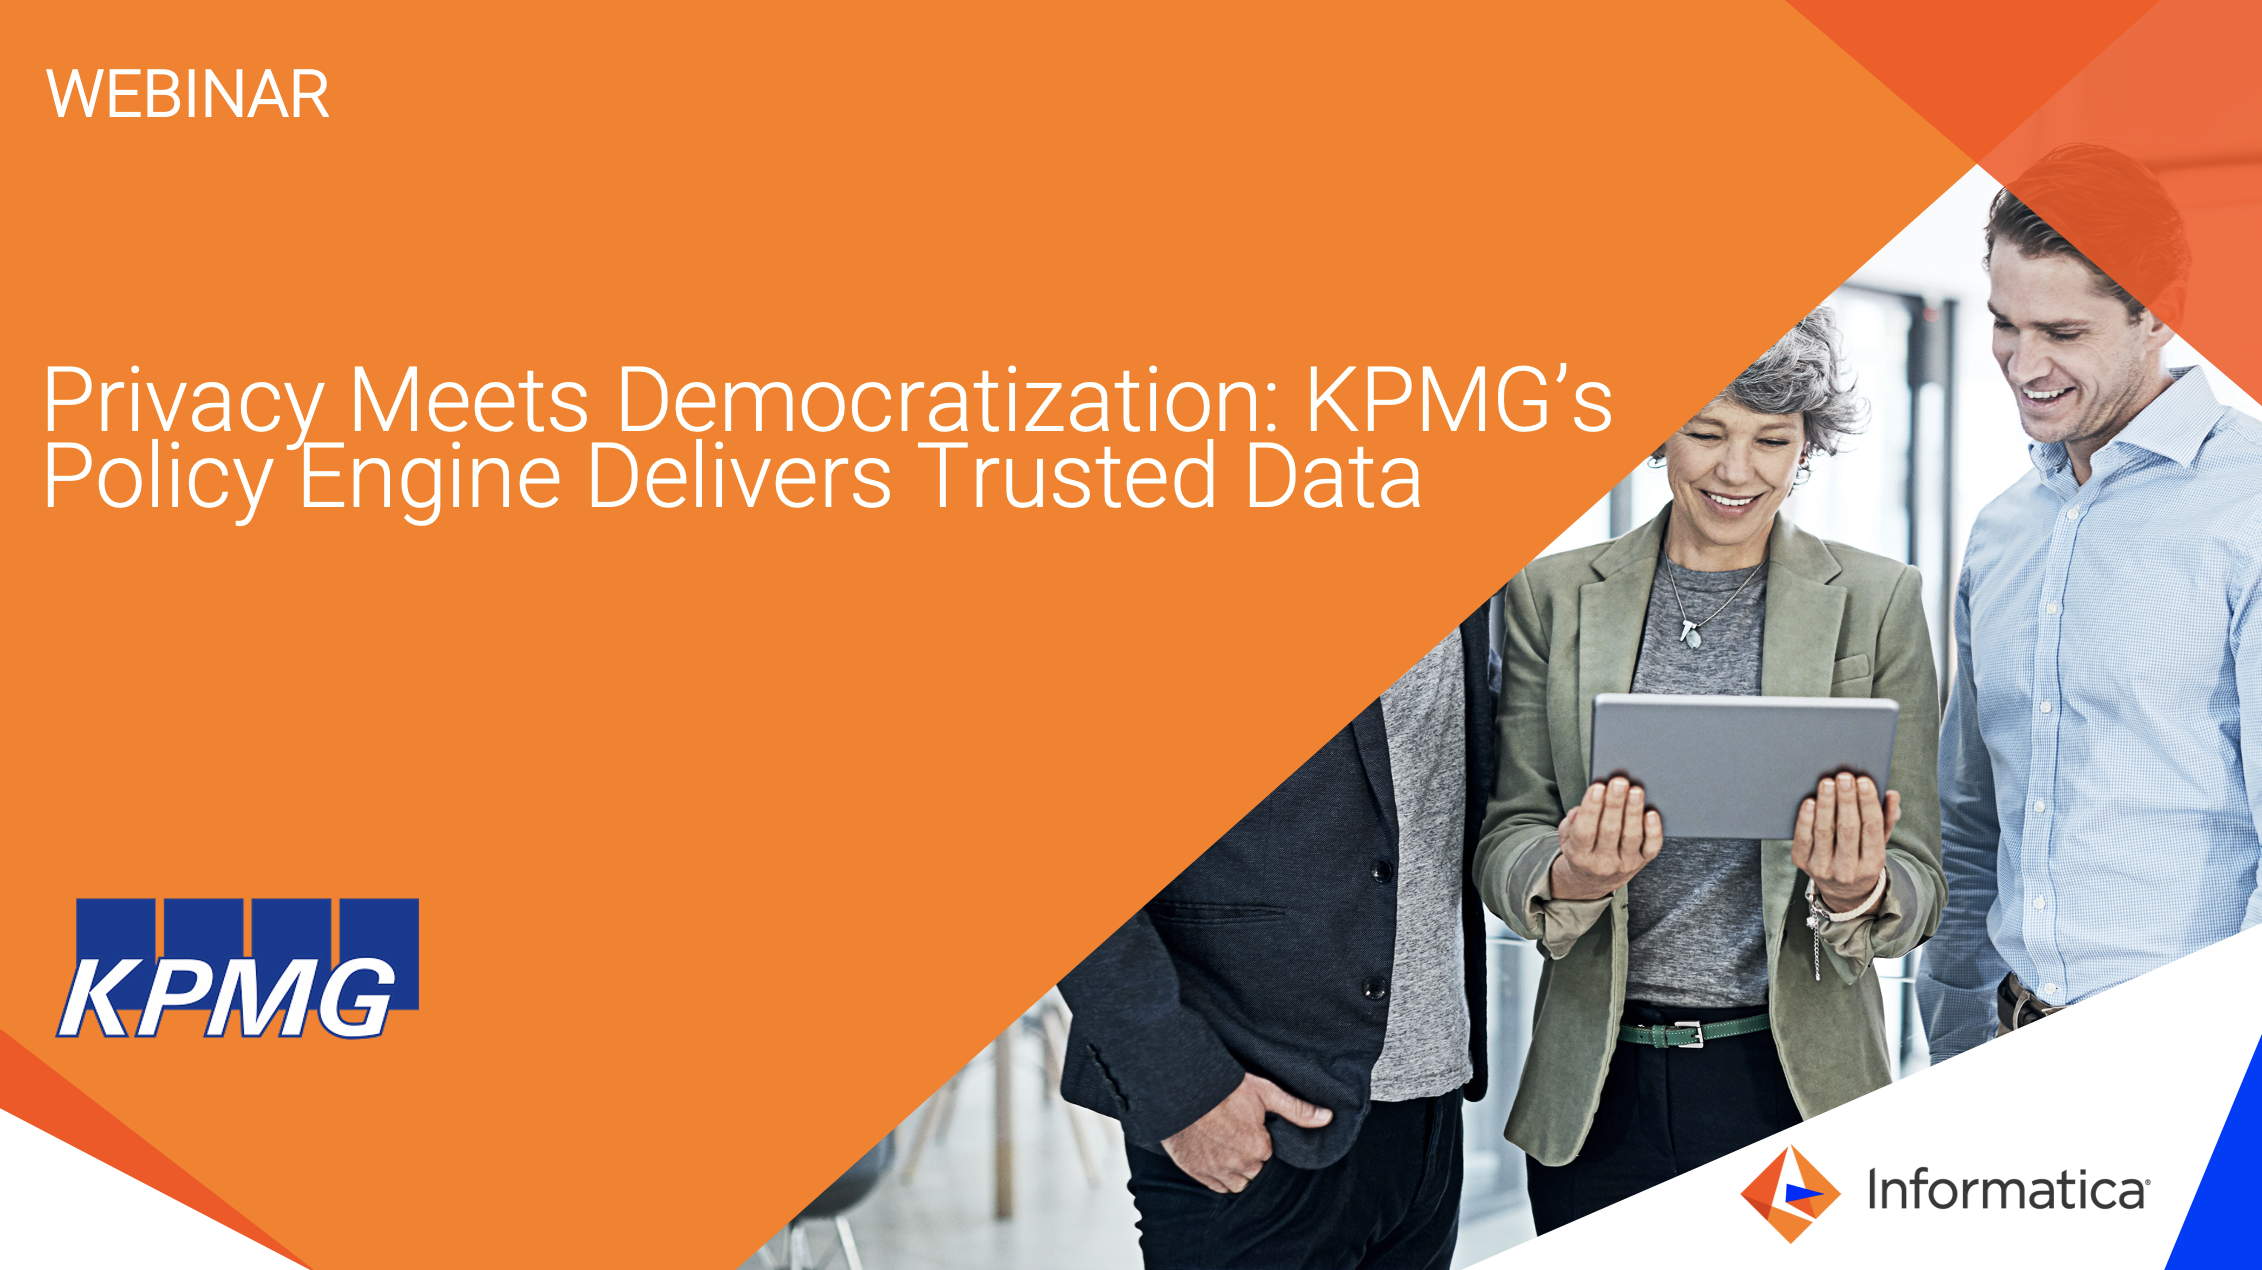 rm01-privacy-meets-democratization-kpmgs-policy-engine-delivers-trusted-data_3208729